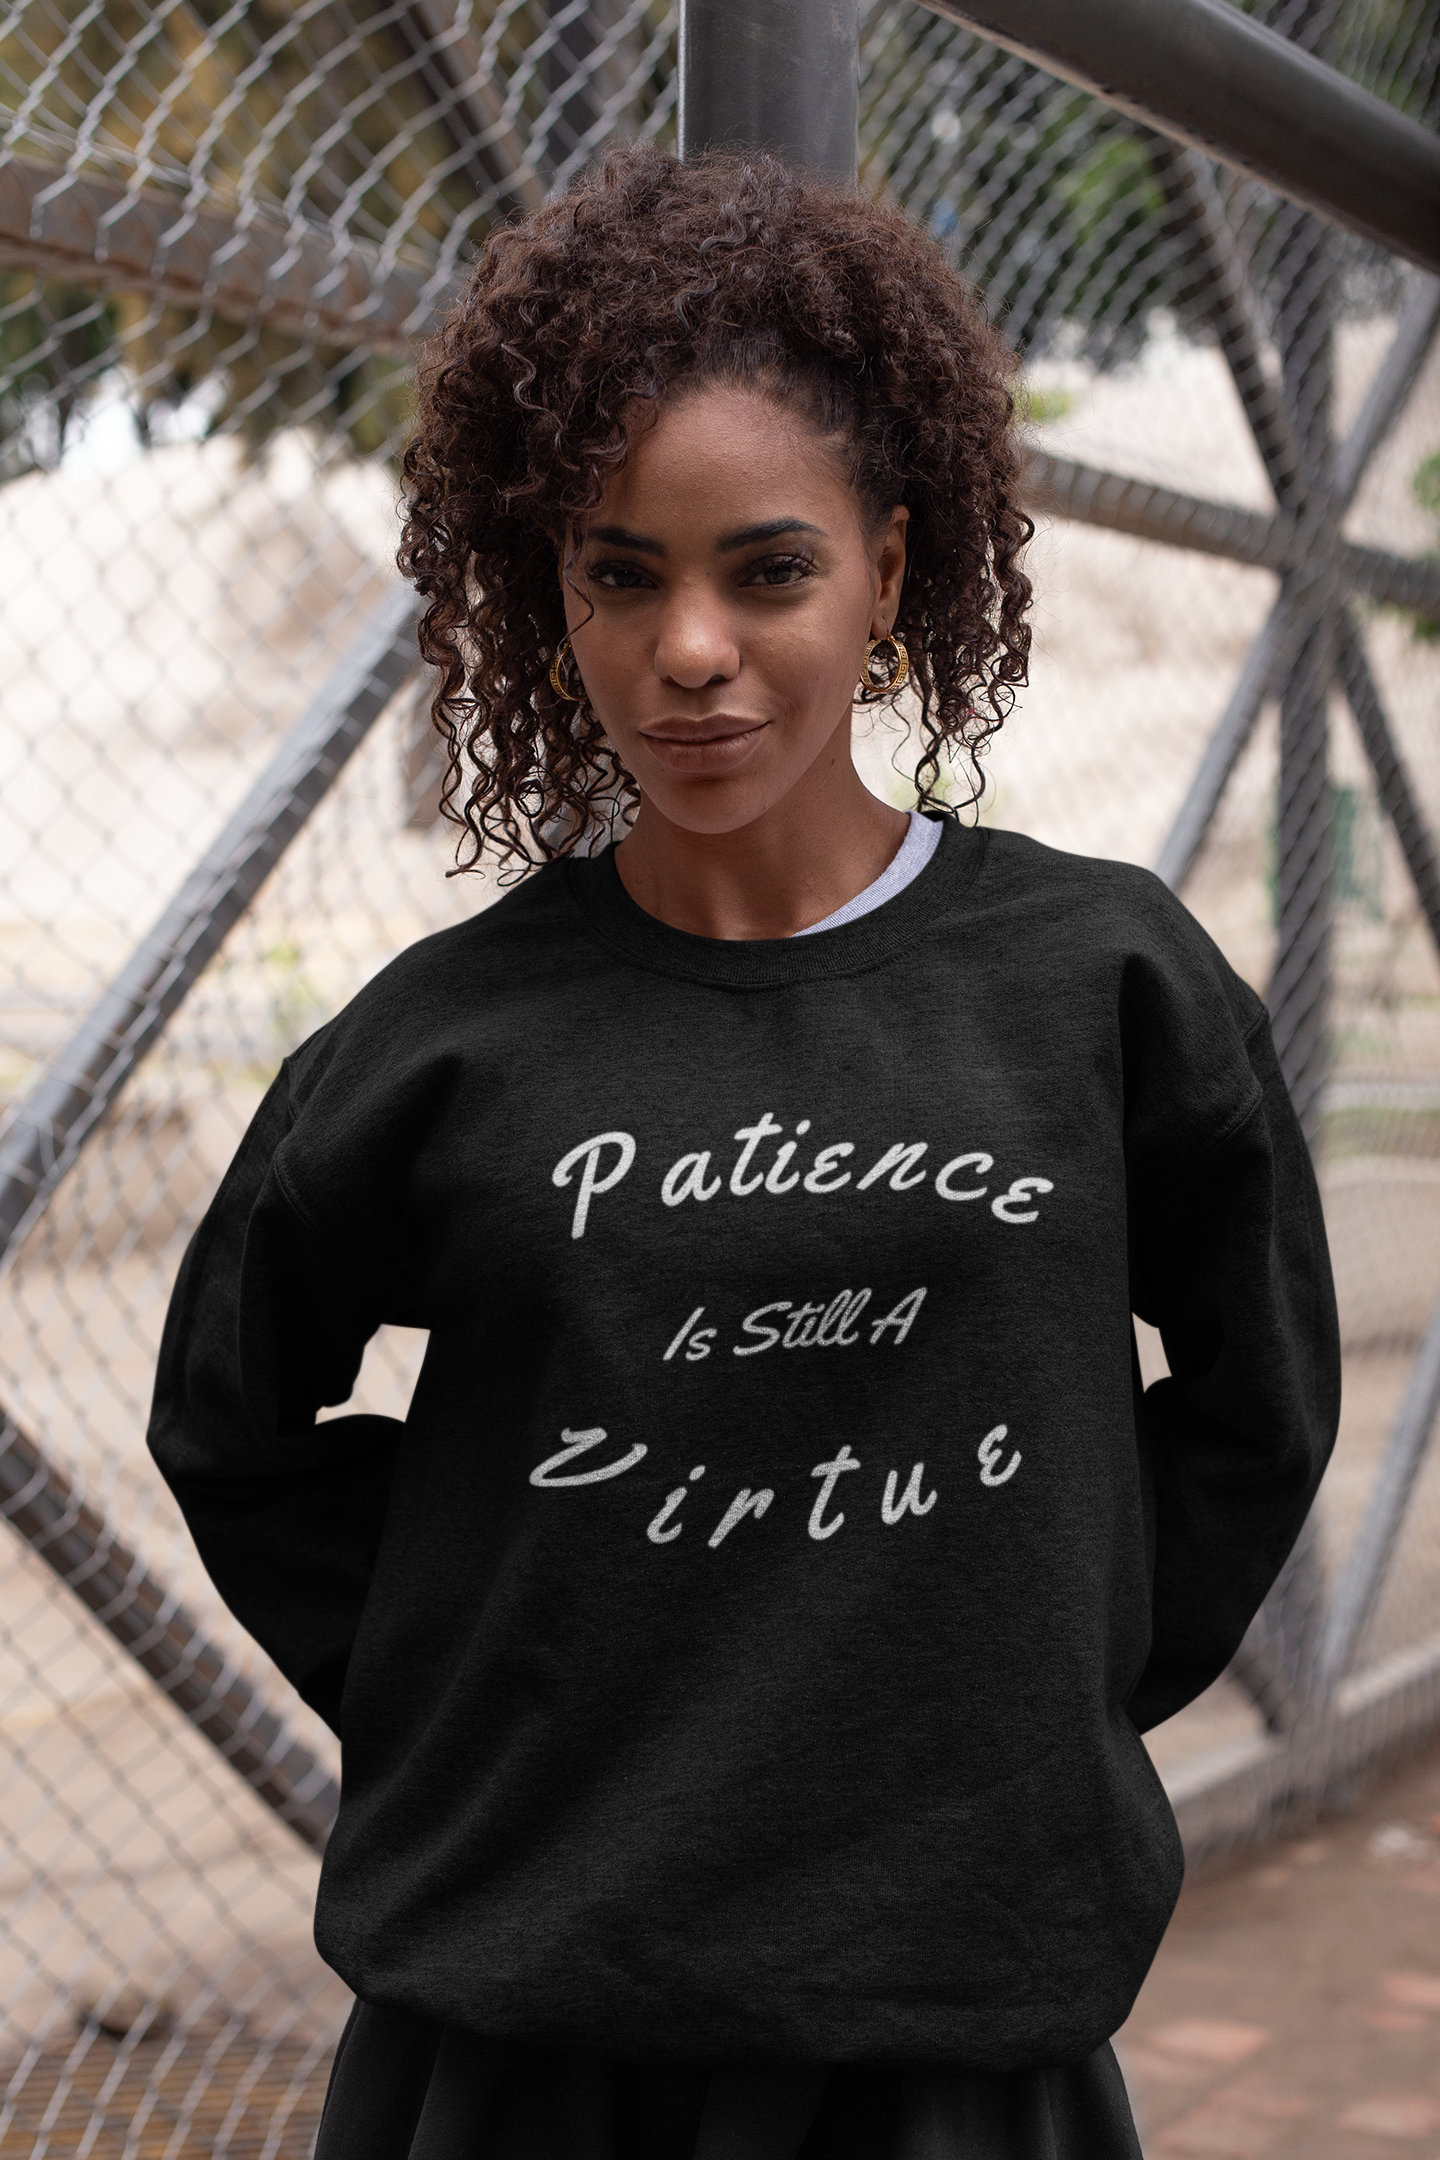 Patience Is Still A Virtue Sweater Inspirational Sweatshirt Wisdom Gift For Him Positive Quote Shirt For Women